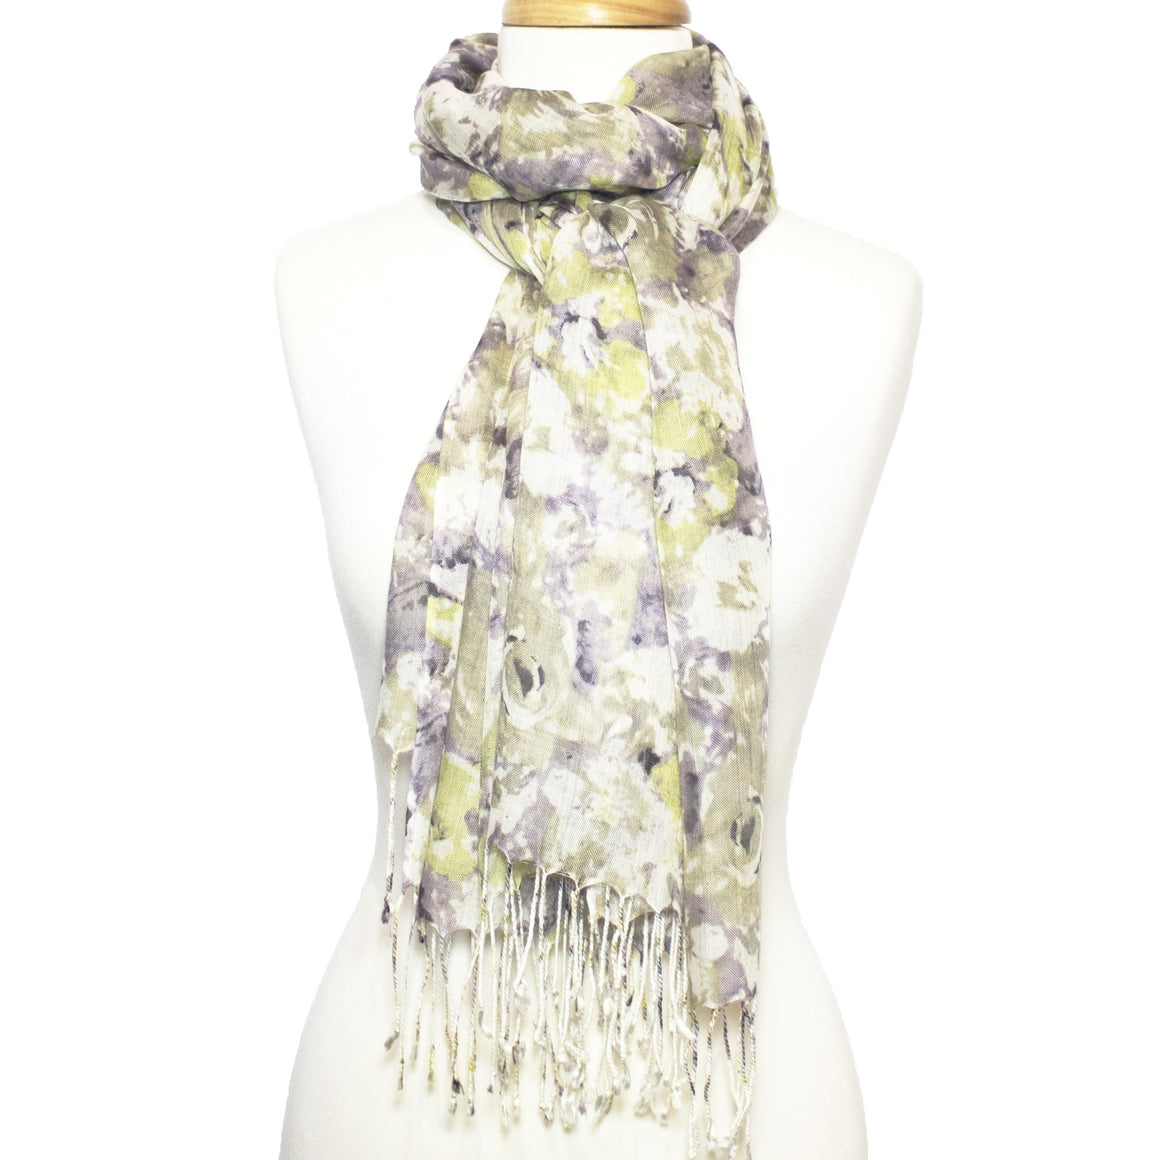 SOFT 100% COTTON LAVENDER & GREEN FLORAL SCARF SCARVES ZENZOEY JEWELRY & ACCESSORIES 